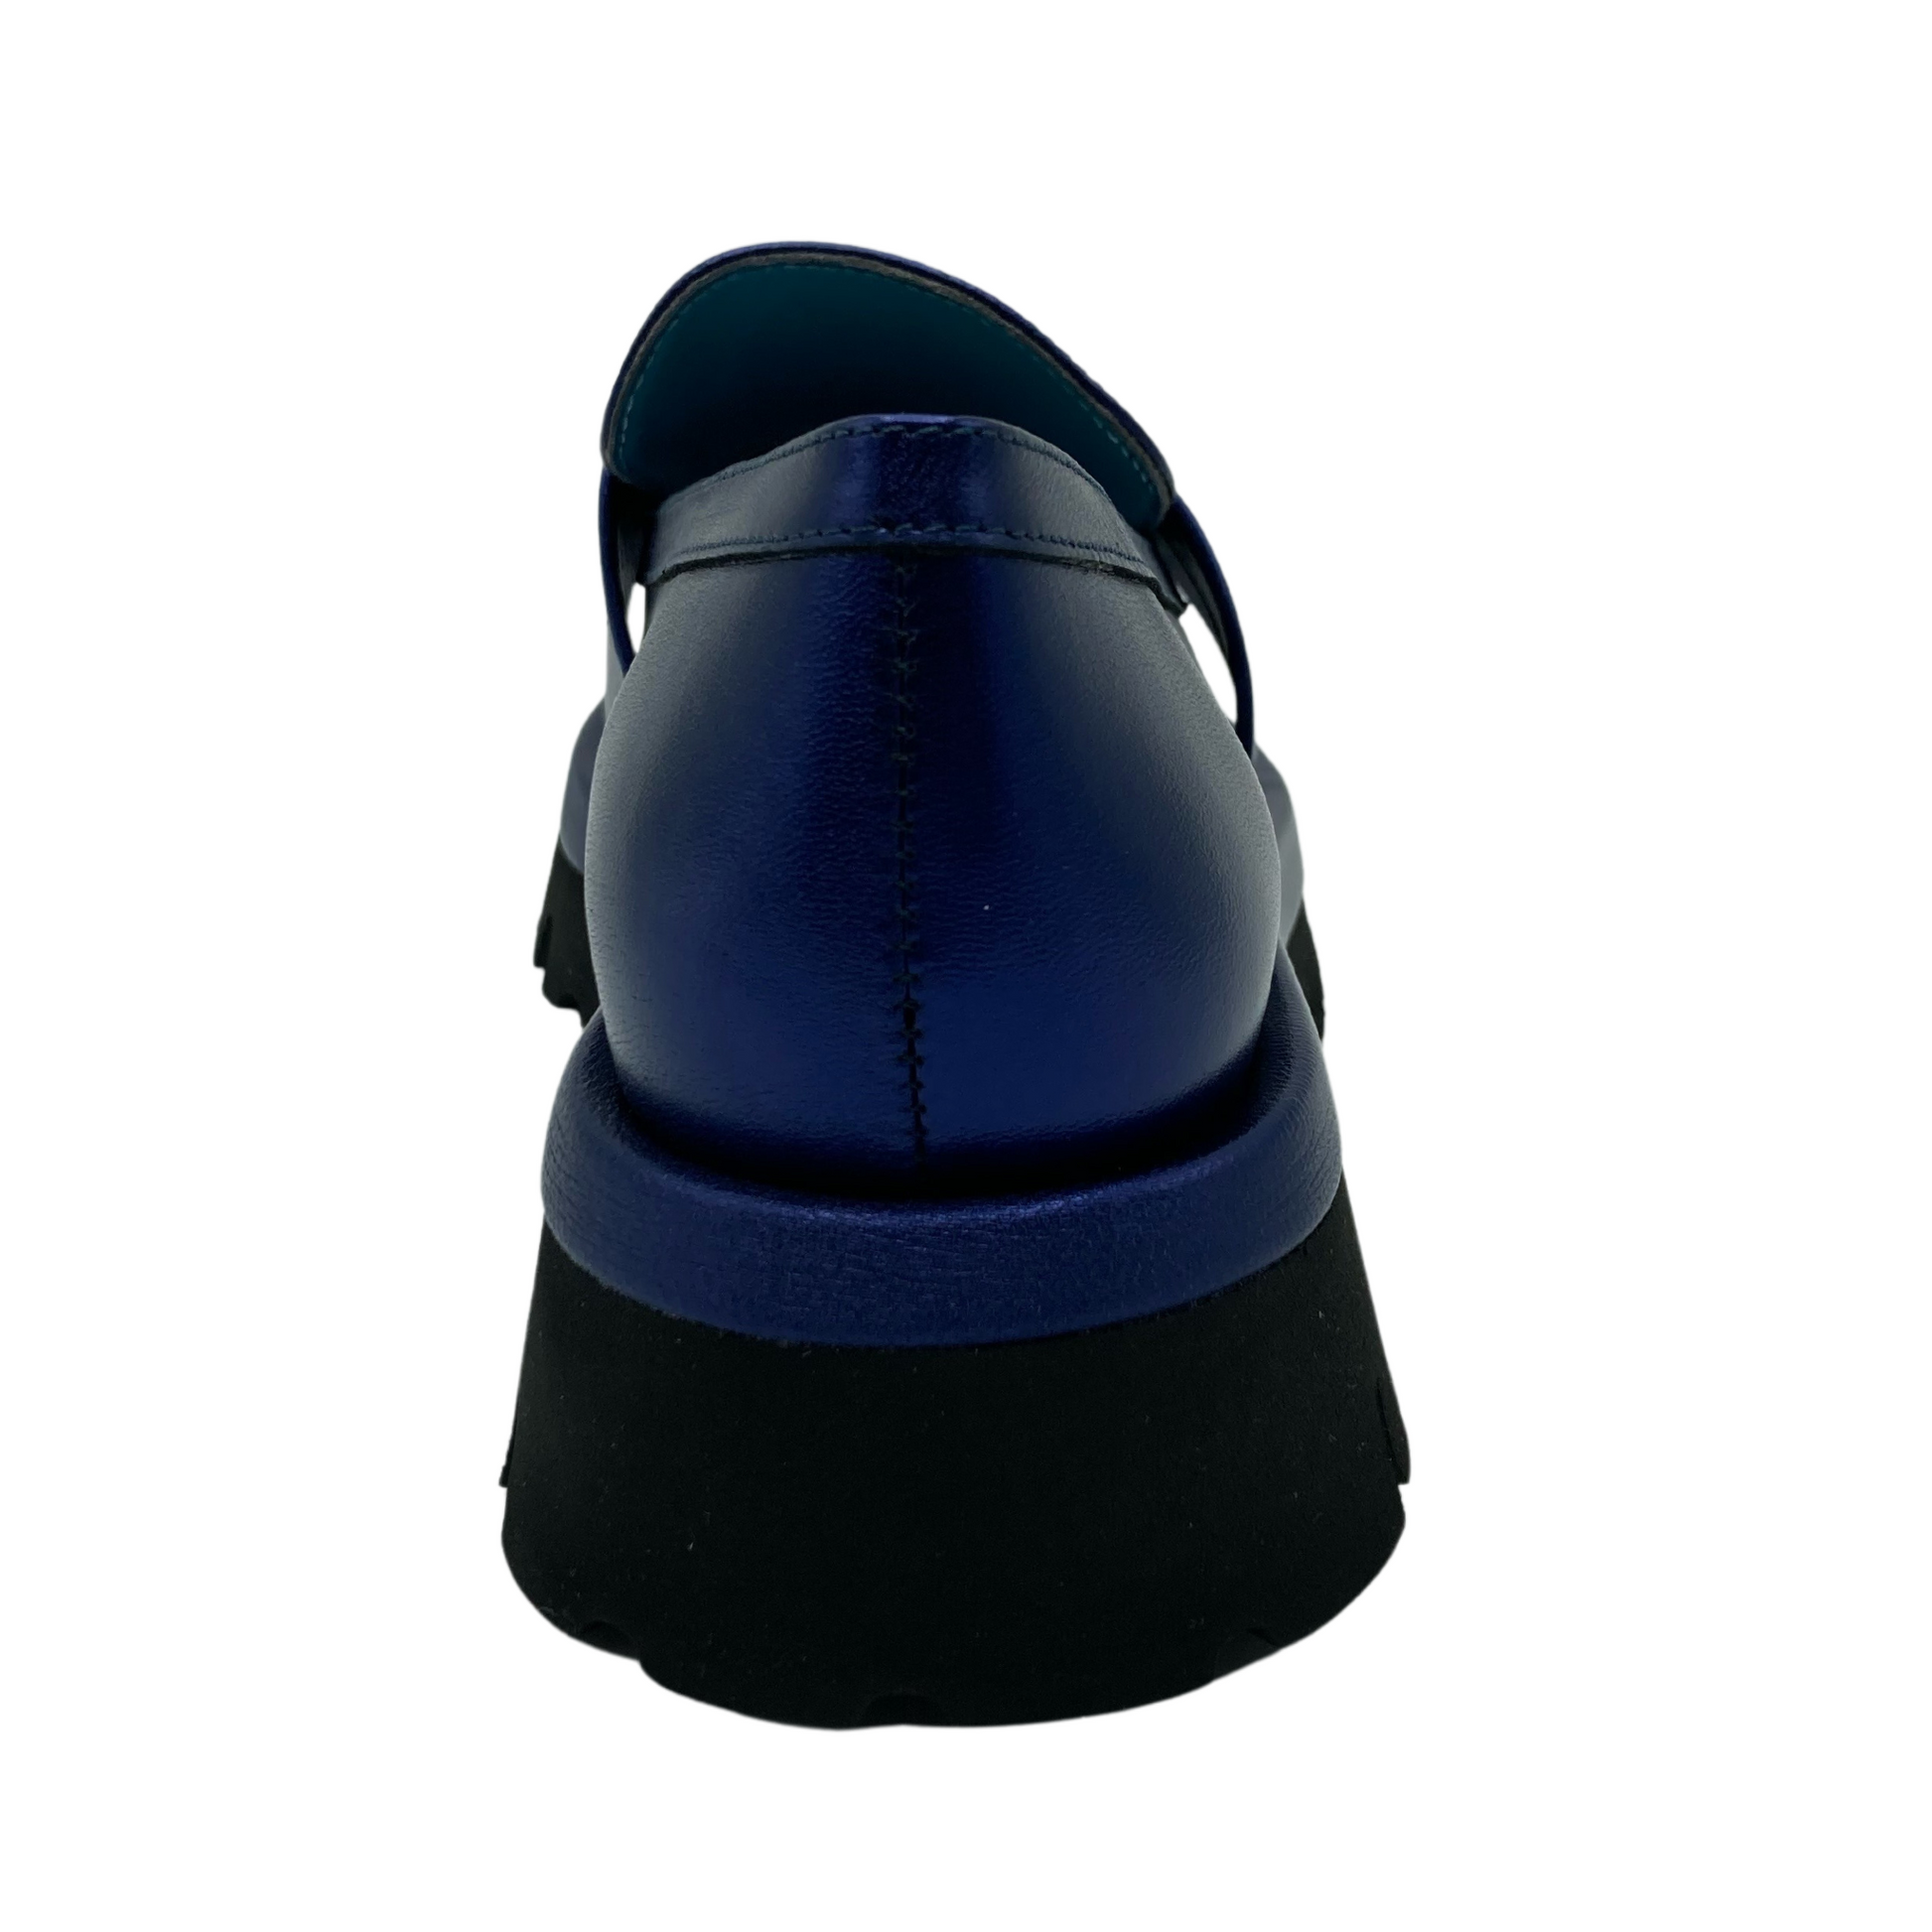 Heel view of back of blue leather loafer with black platform rubber outsole